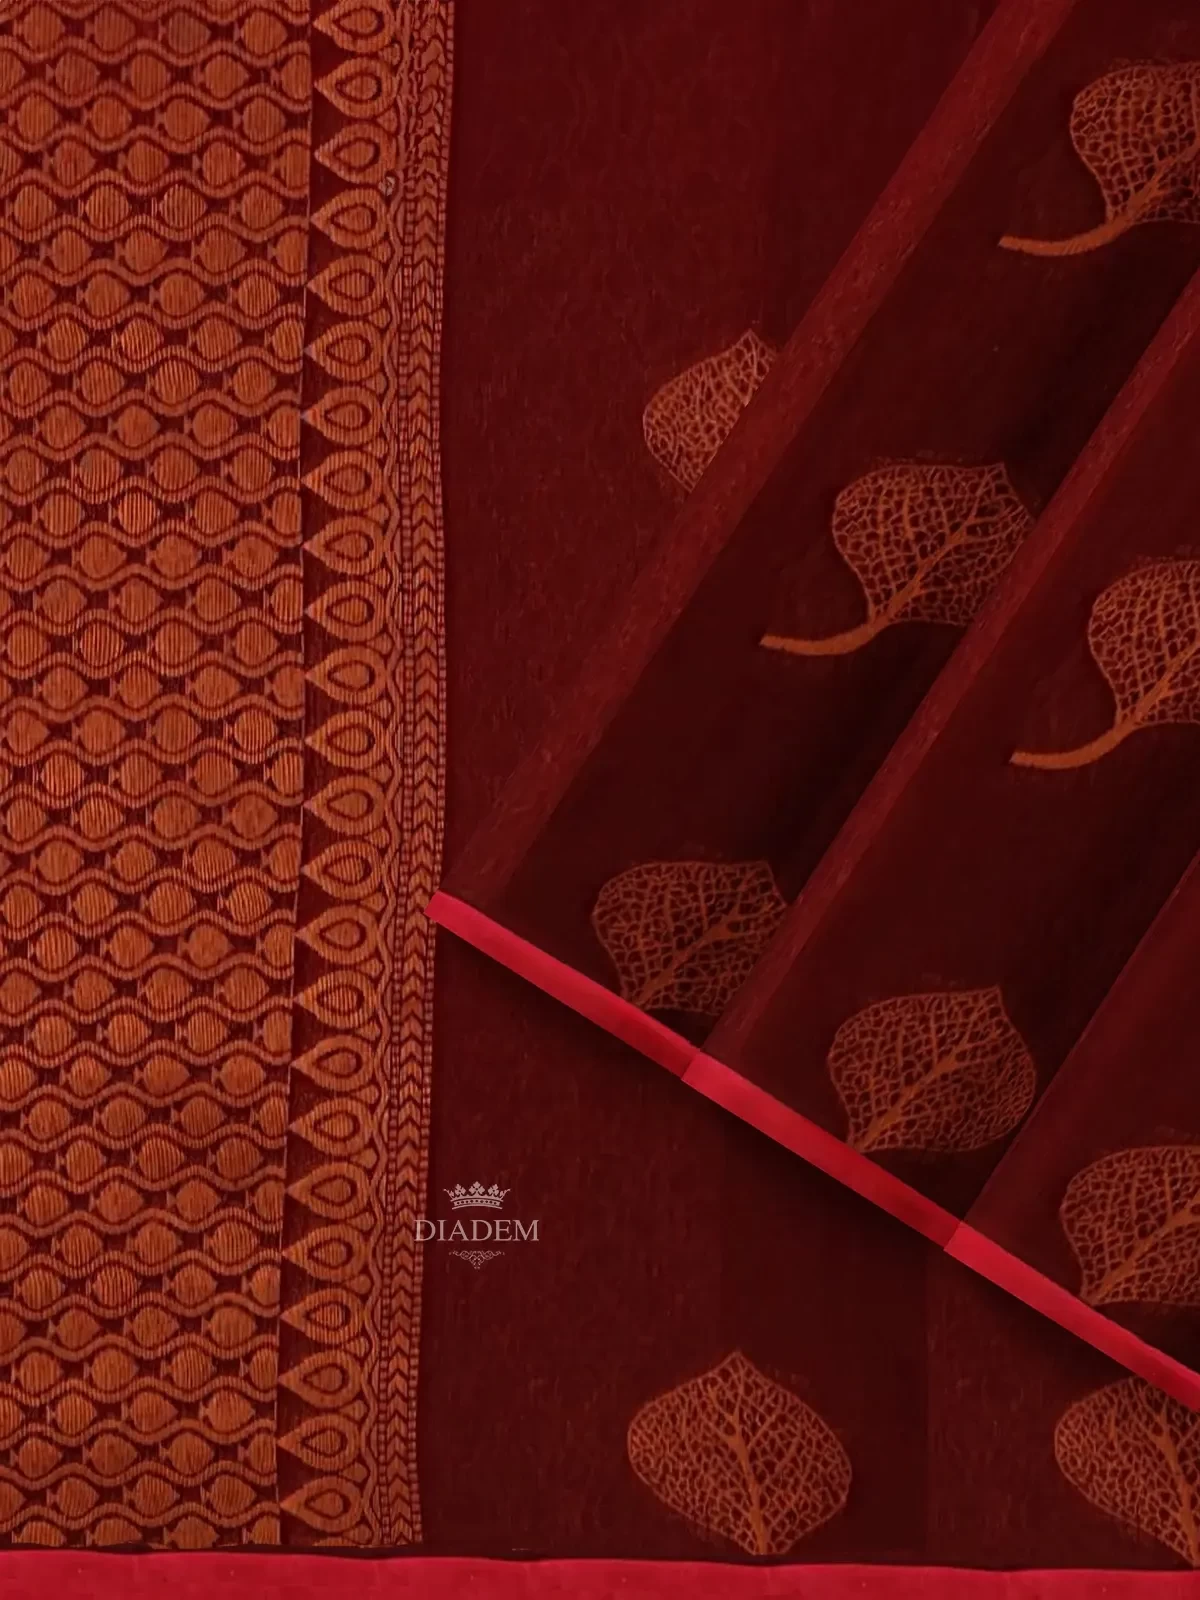 Maroon Silk Cotton Saree With Design Prints On The Body And Without Border